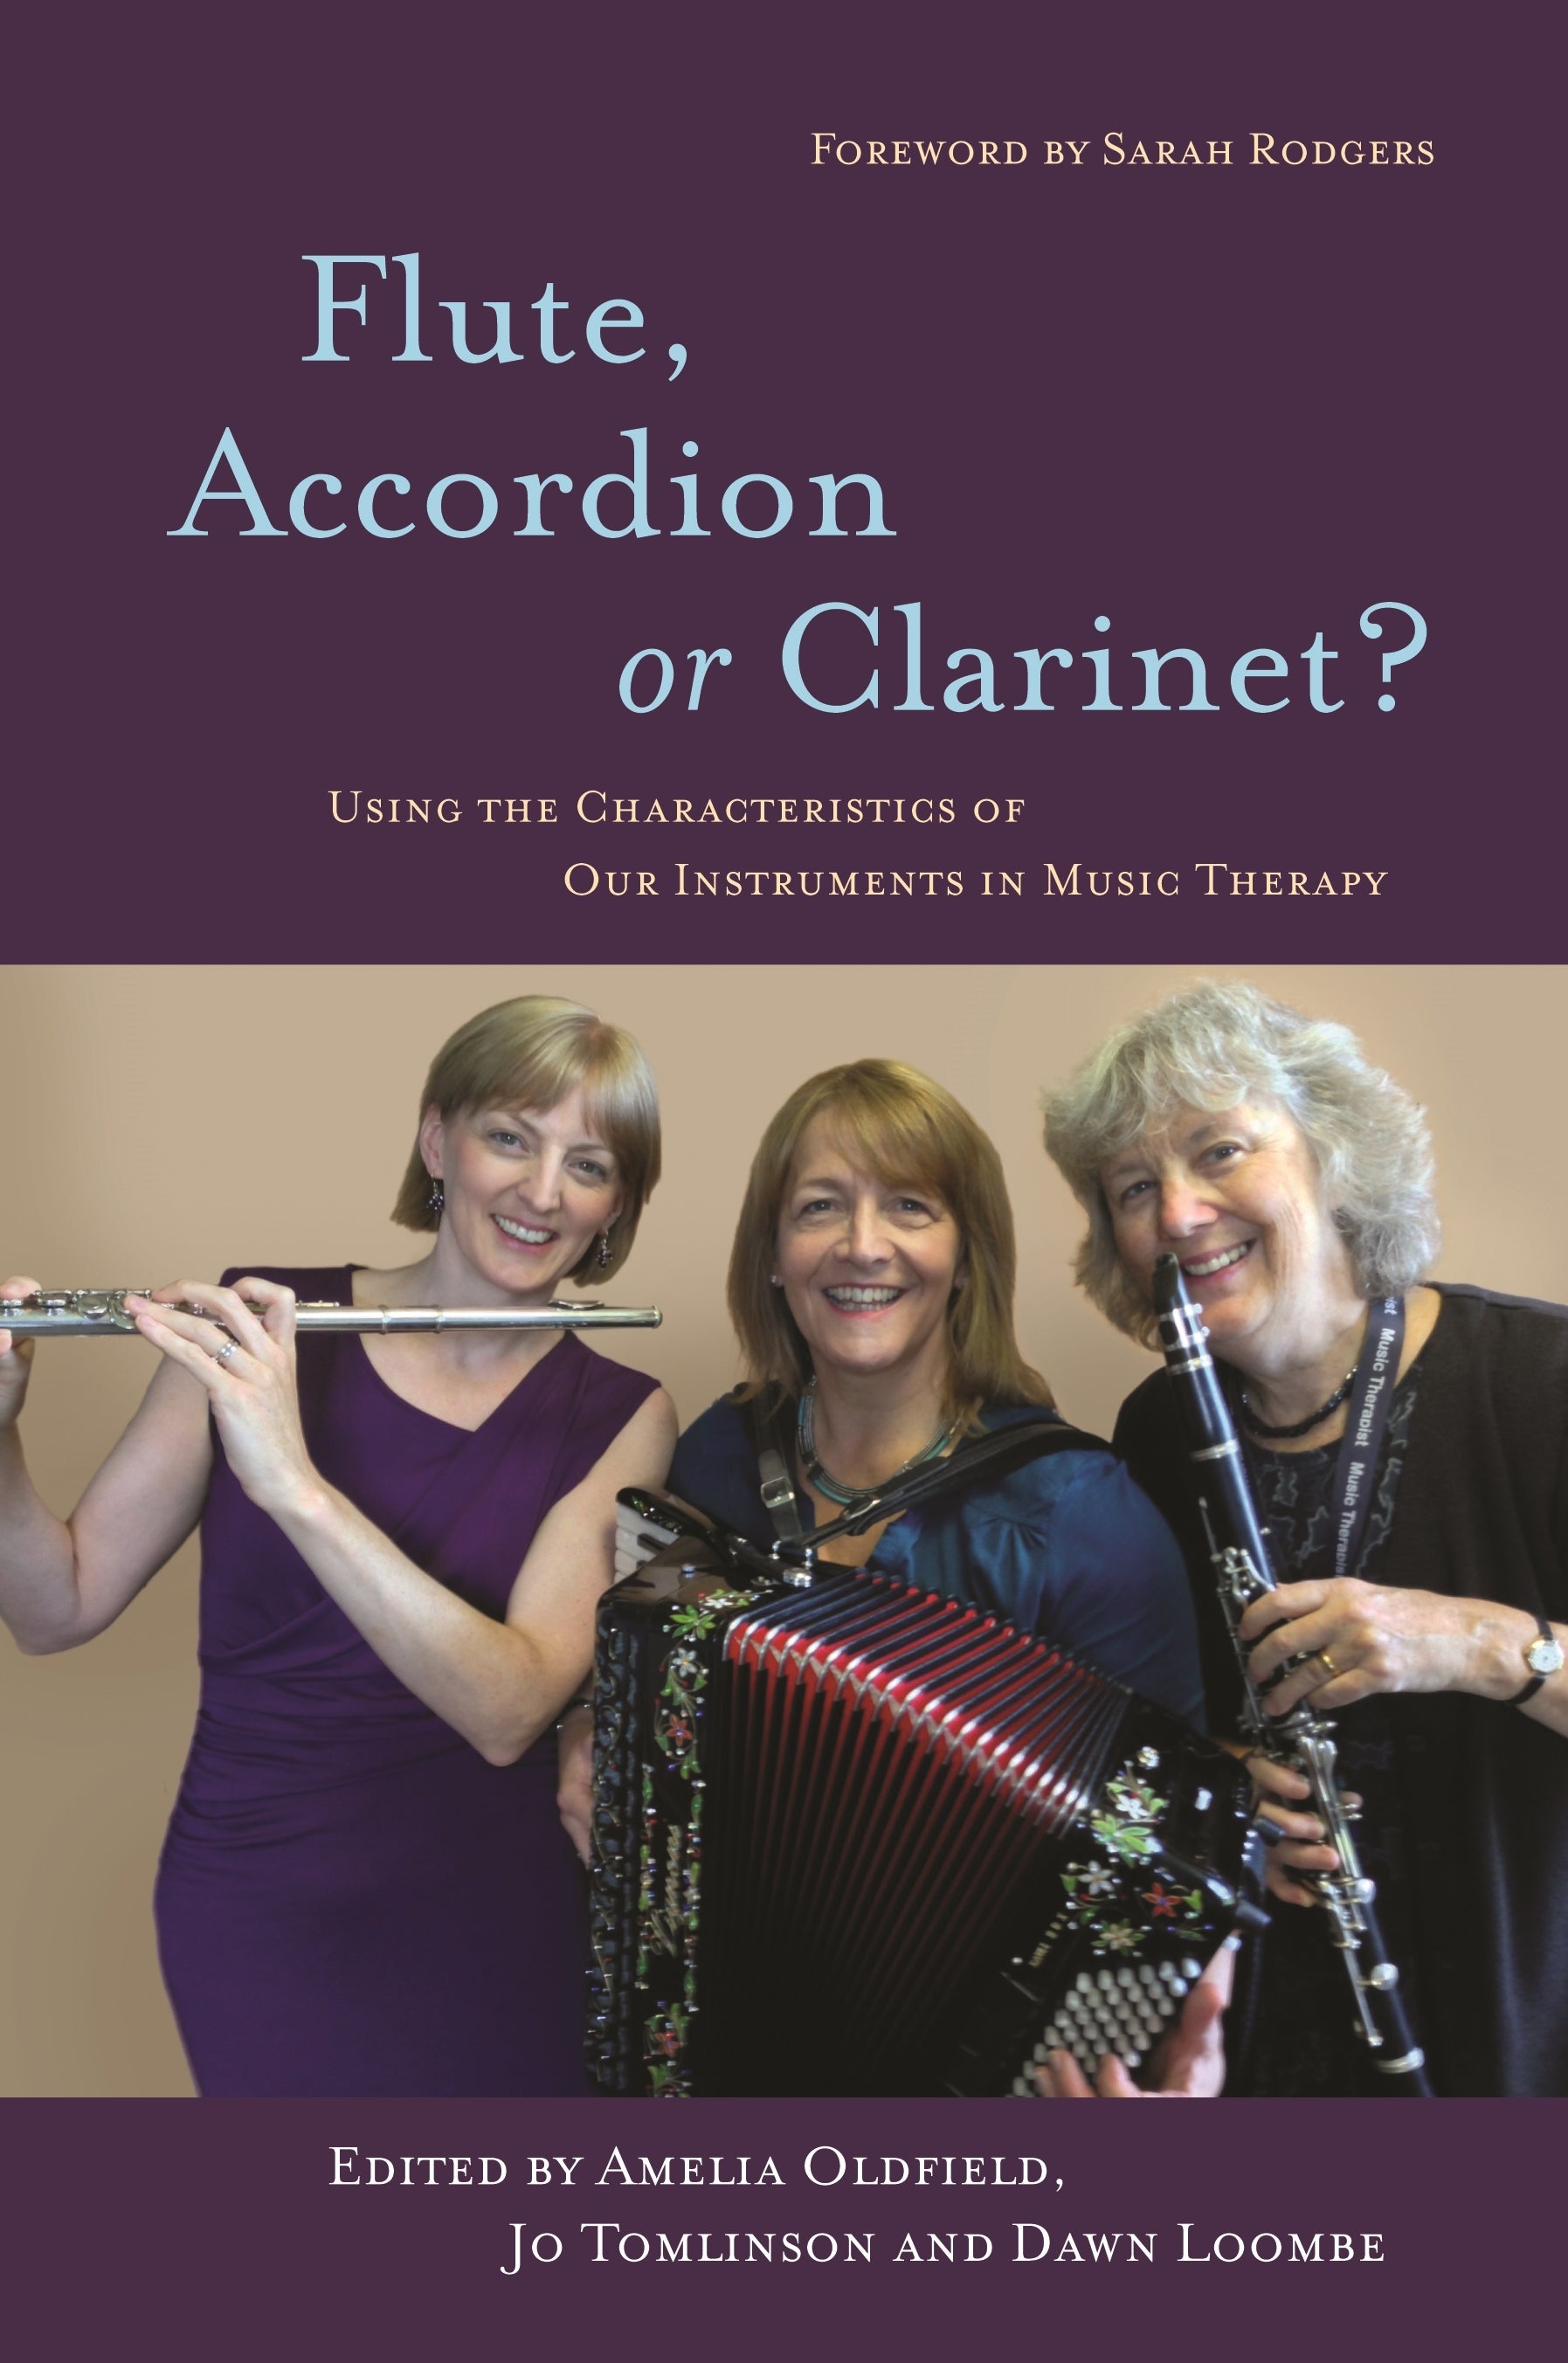 Flute, Accordion or Clarinet? by Sarah Rodgers, Amelia Oldfield, Jo Tomlinson, Dawn Loombe